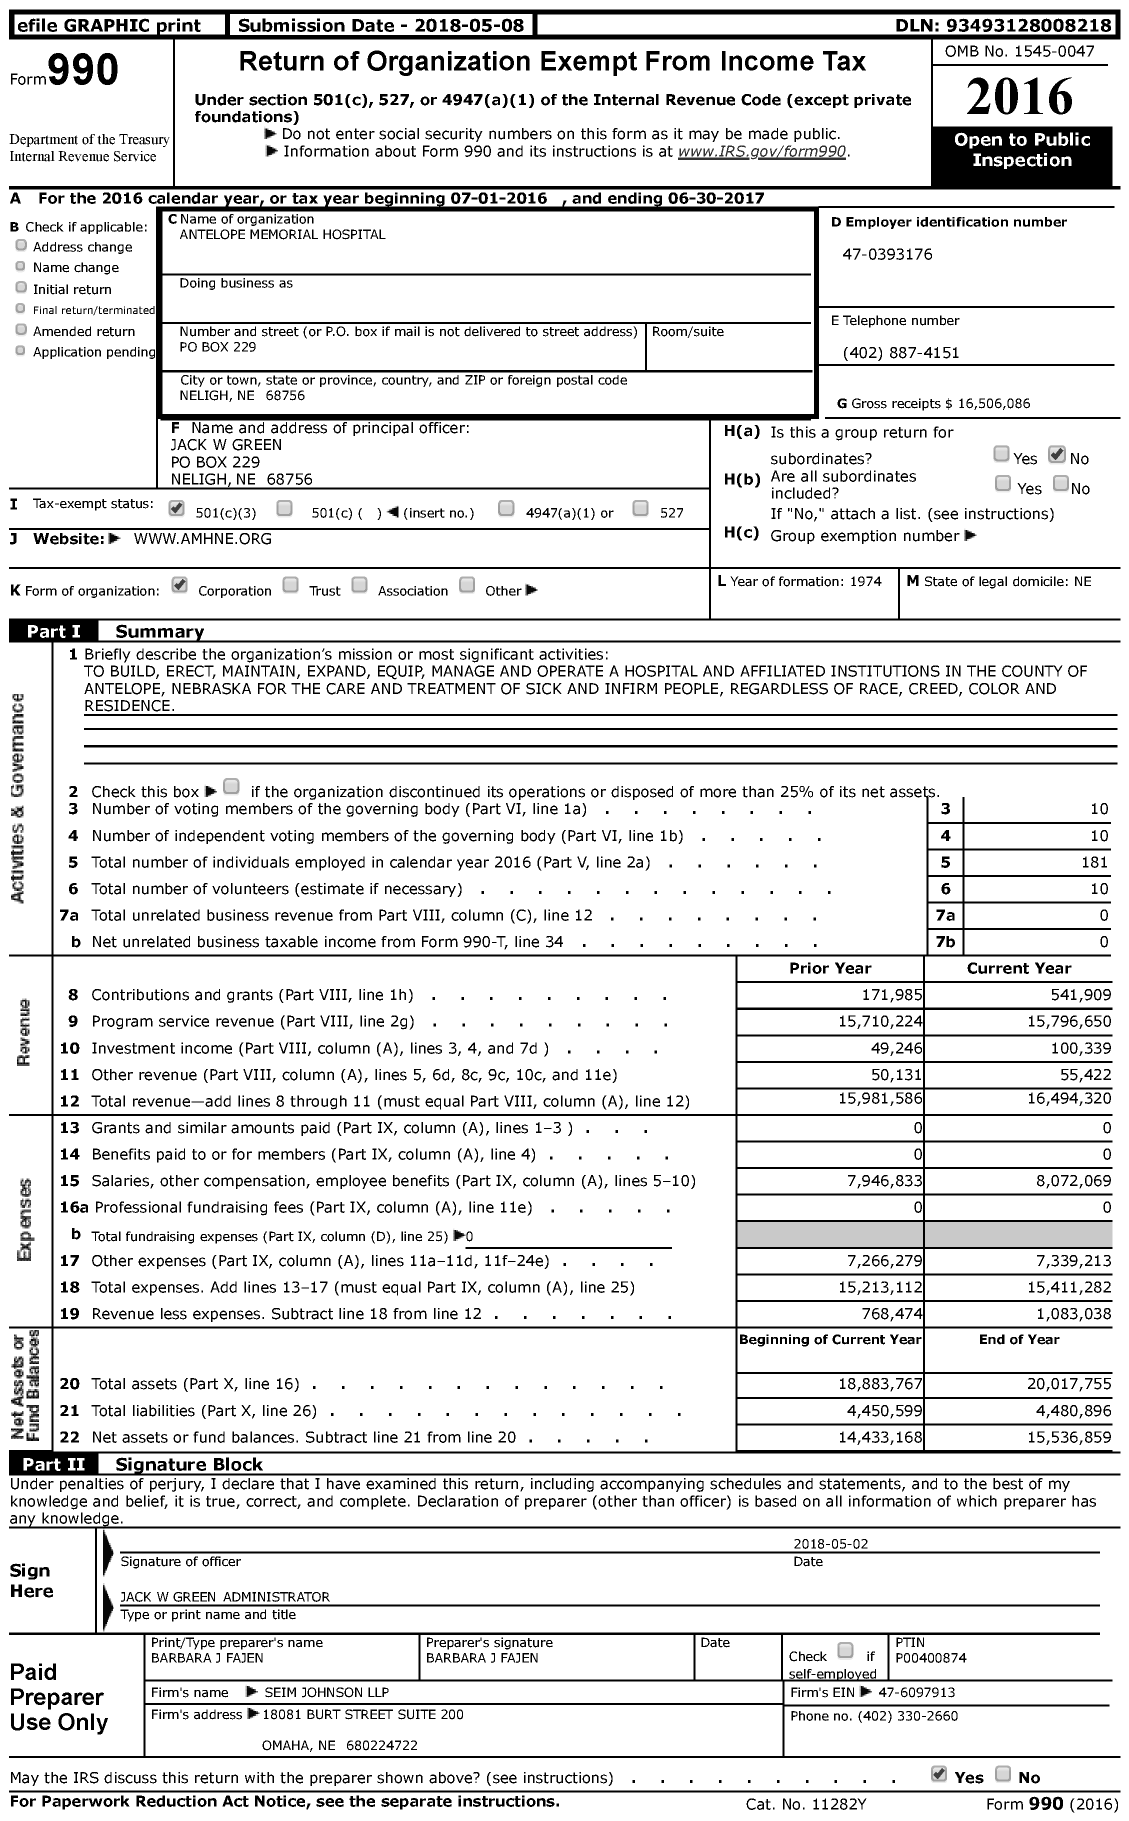 Image of first page of 2016 Form 990 for Antelope Memorial Hospital (AMH)